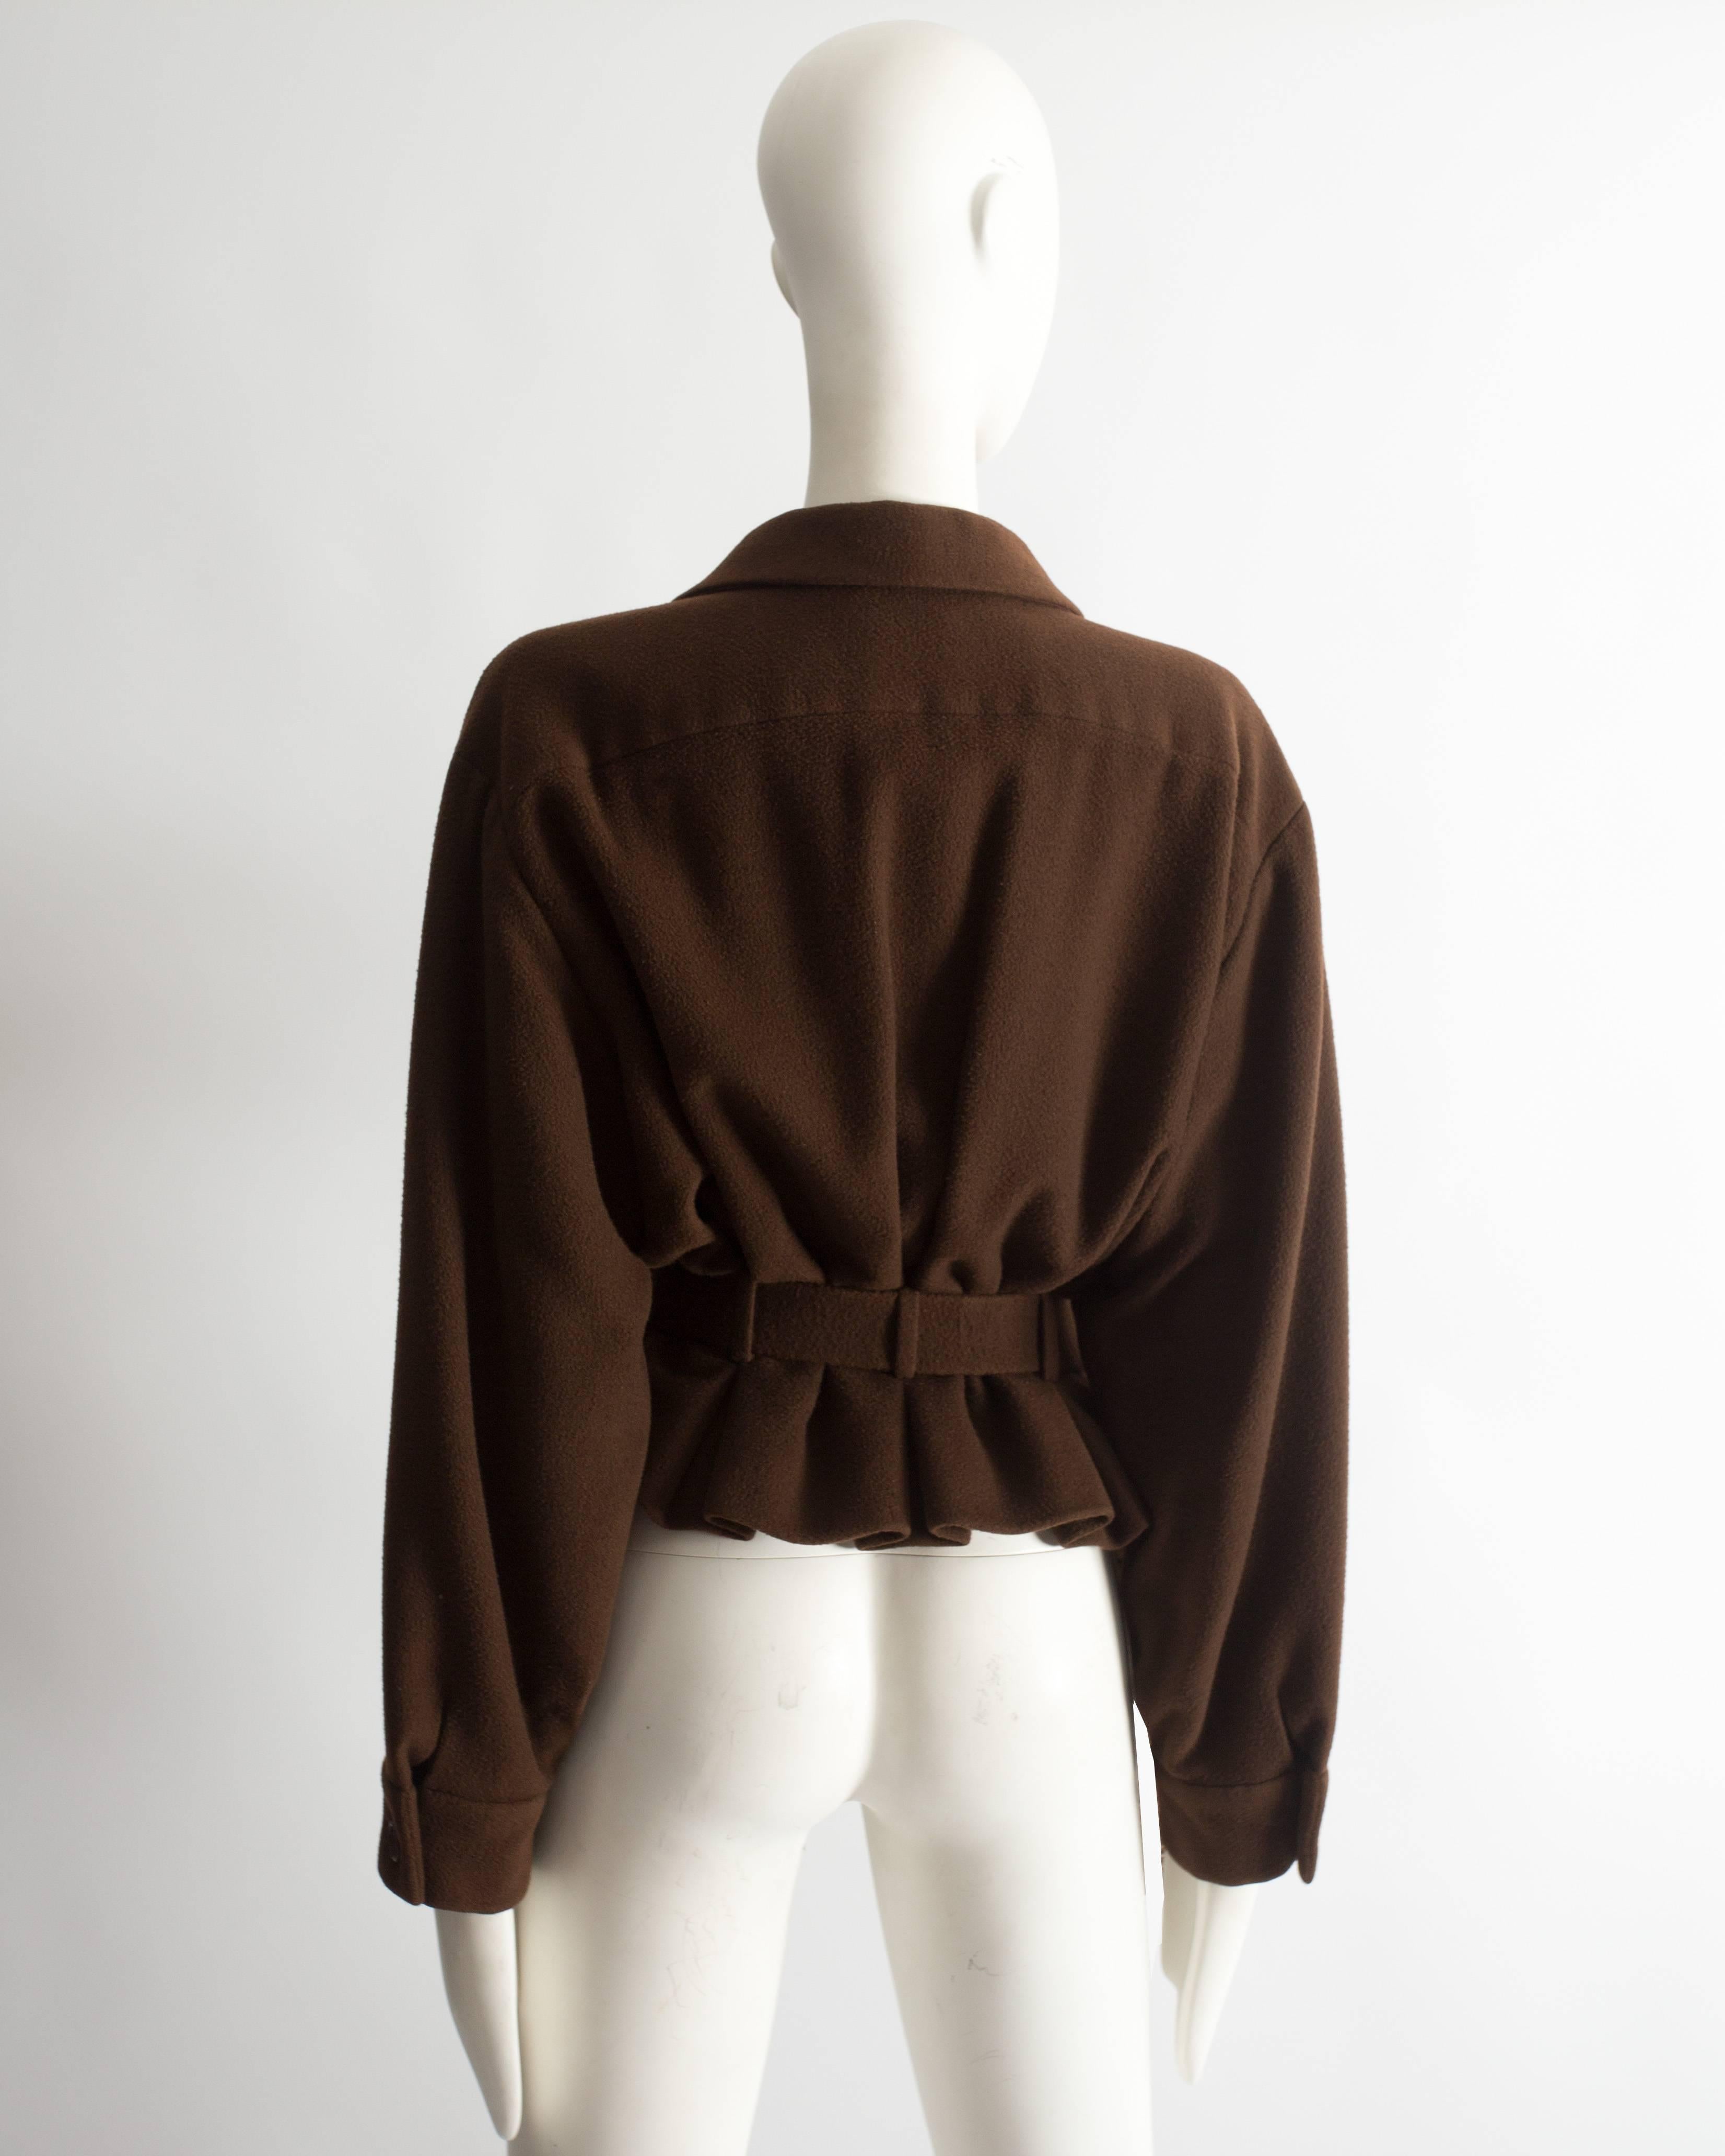 Women's Christian Dior Haute Couture brown cashmere wool jacket, AW 1988